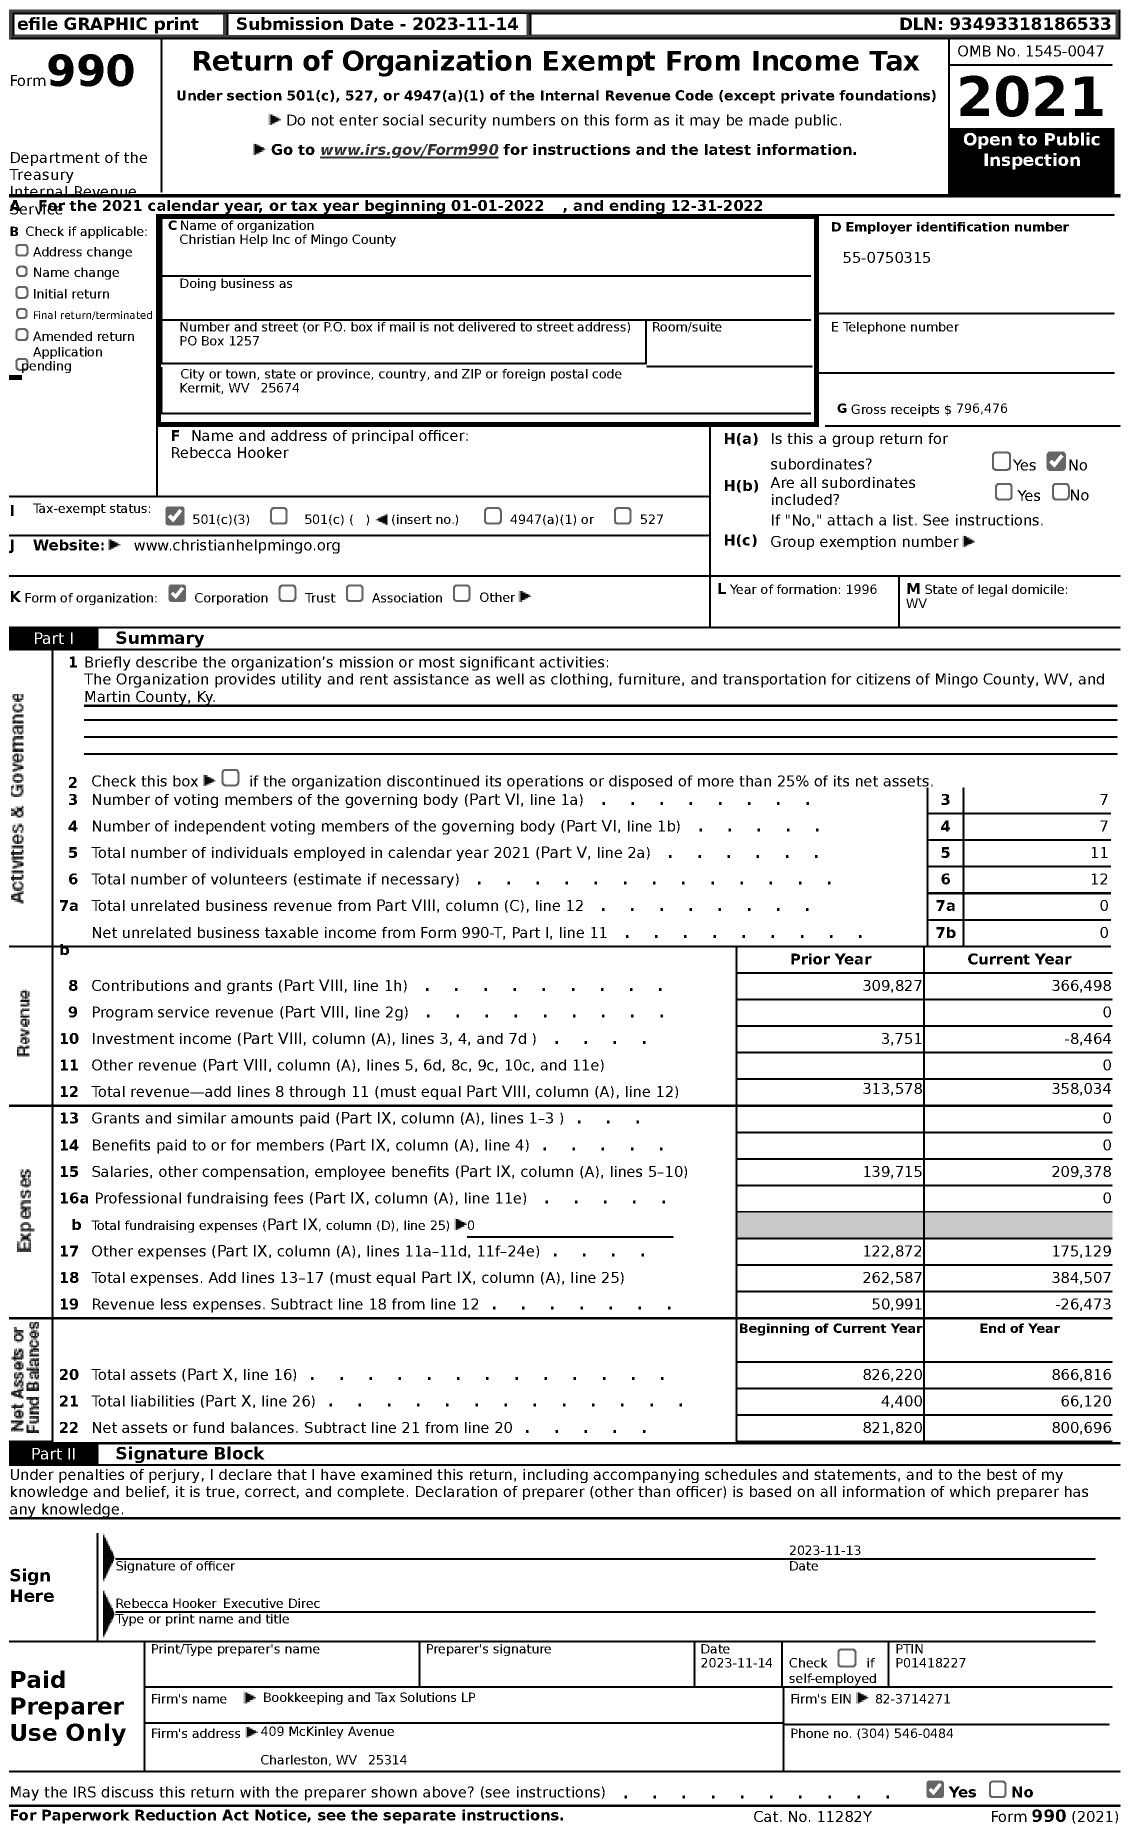 Image of first page of 2022 Form 990 for Christian Help Inc of Mingo County